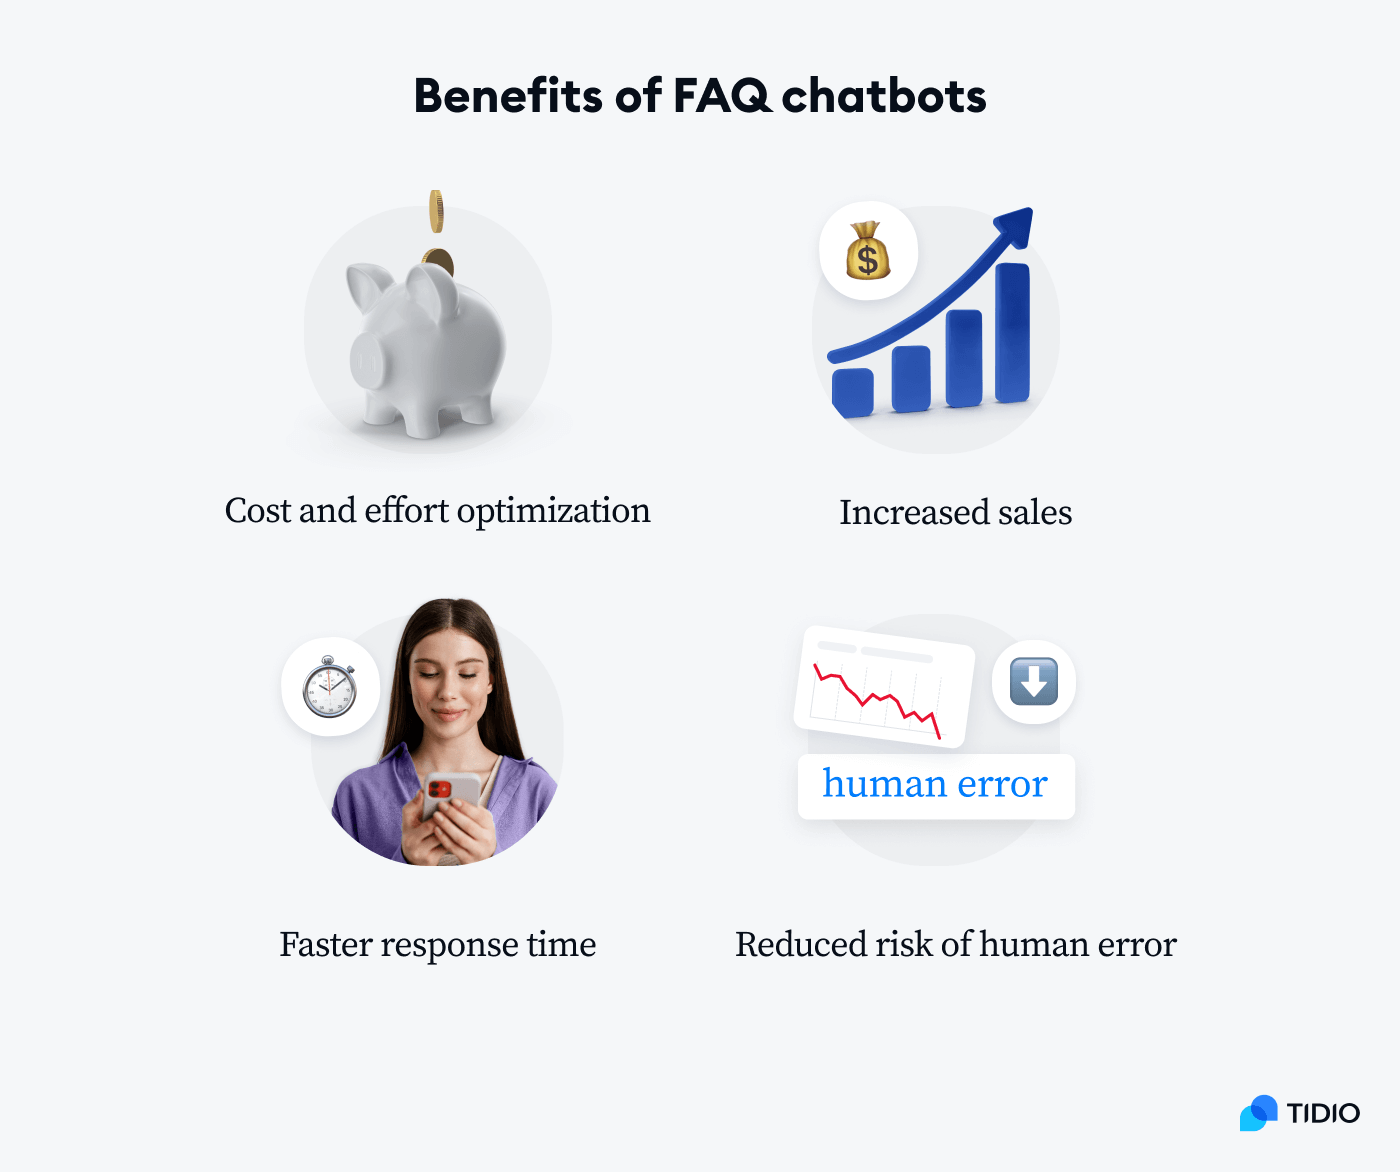 benefits of faq chatbots listed on image